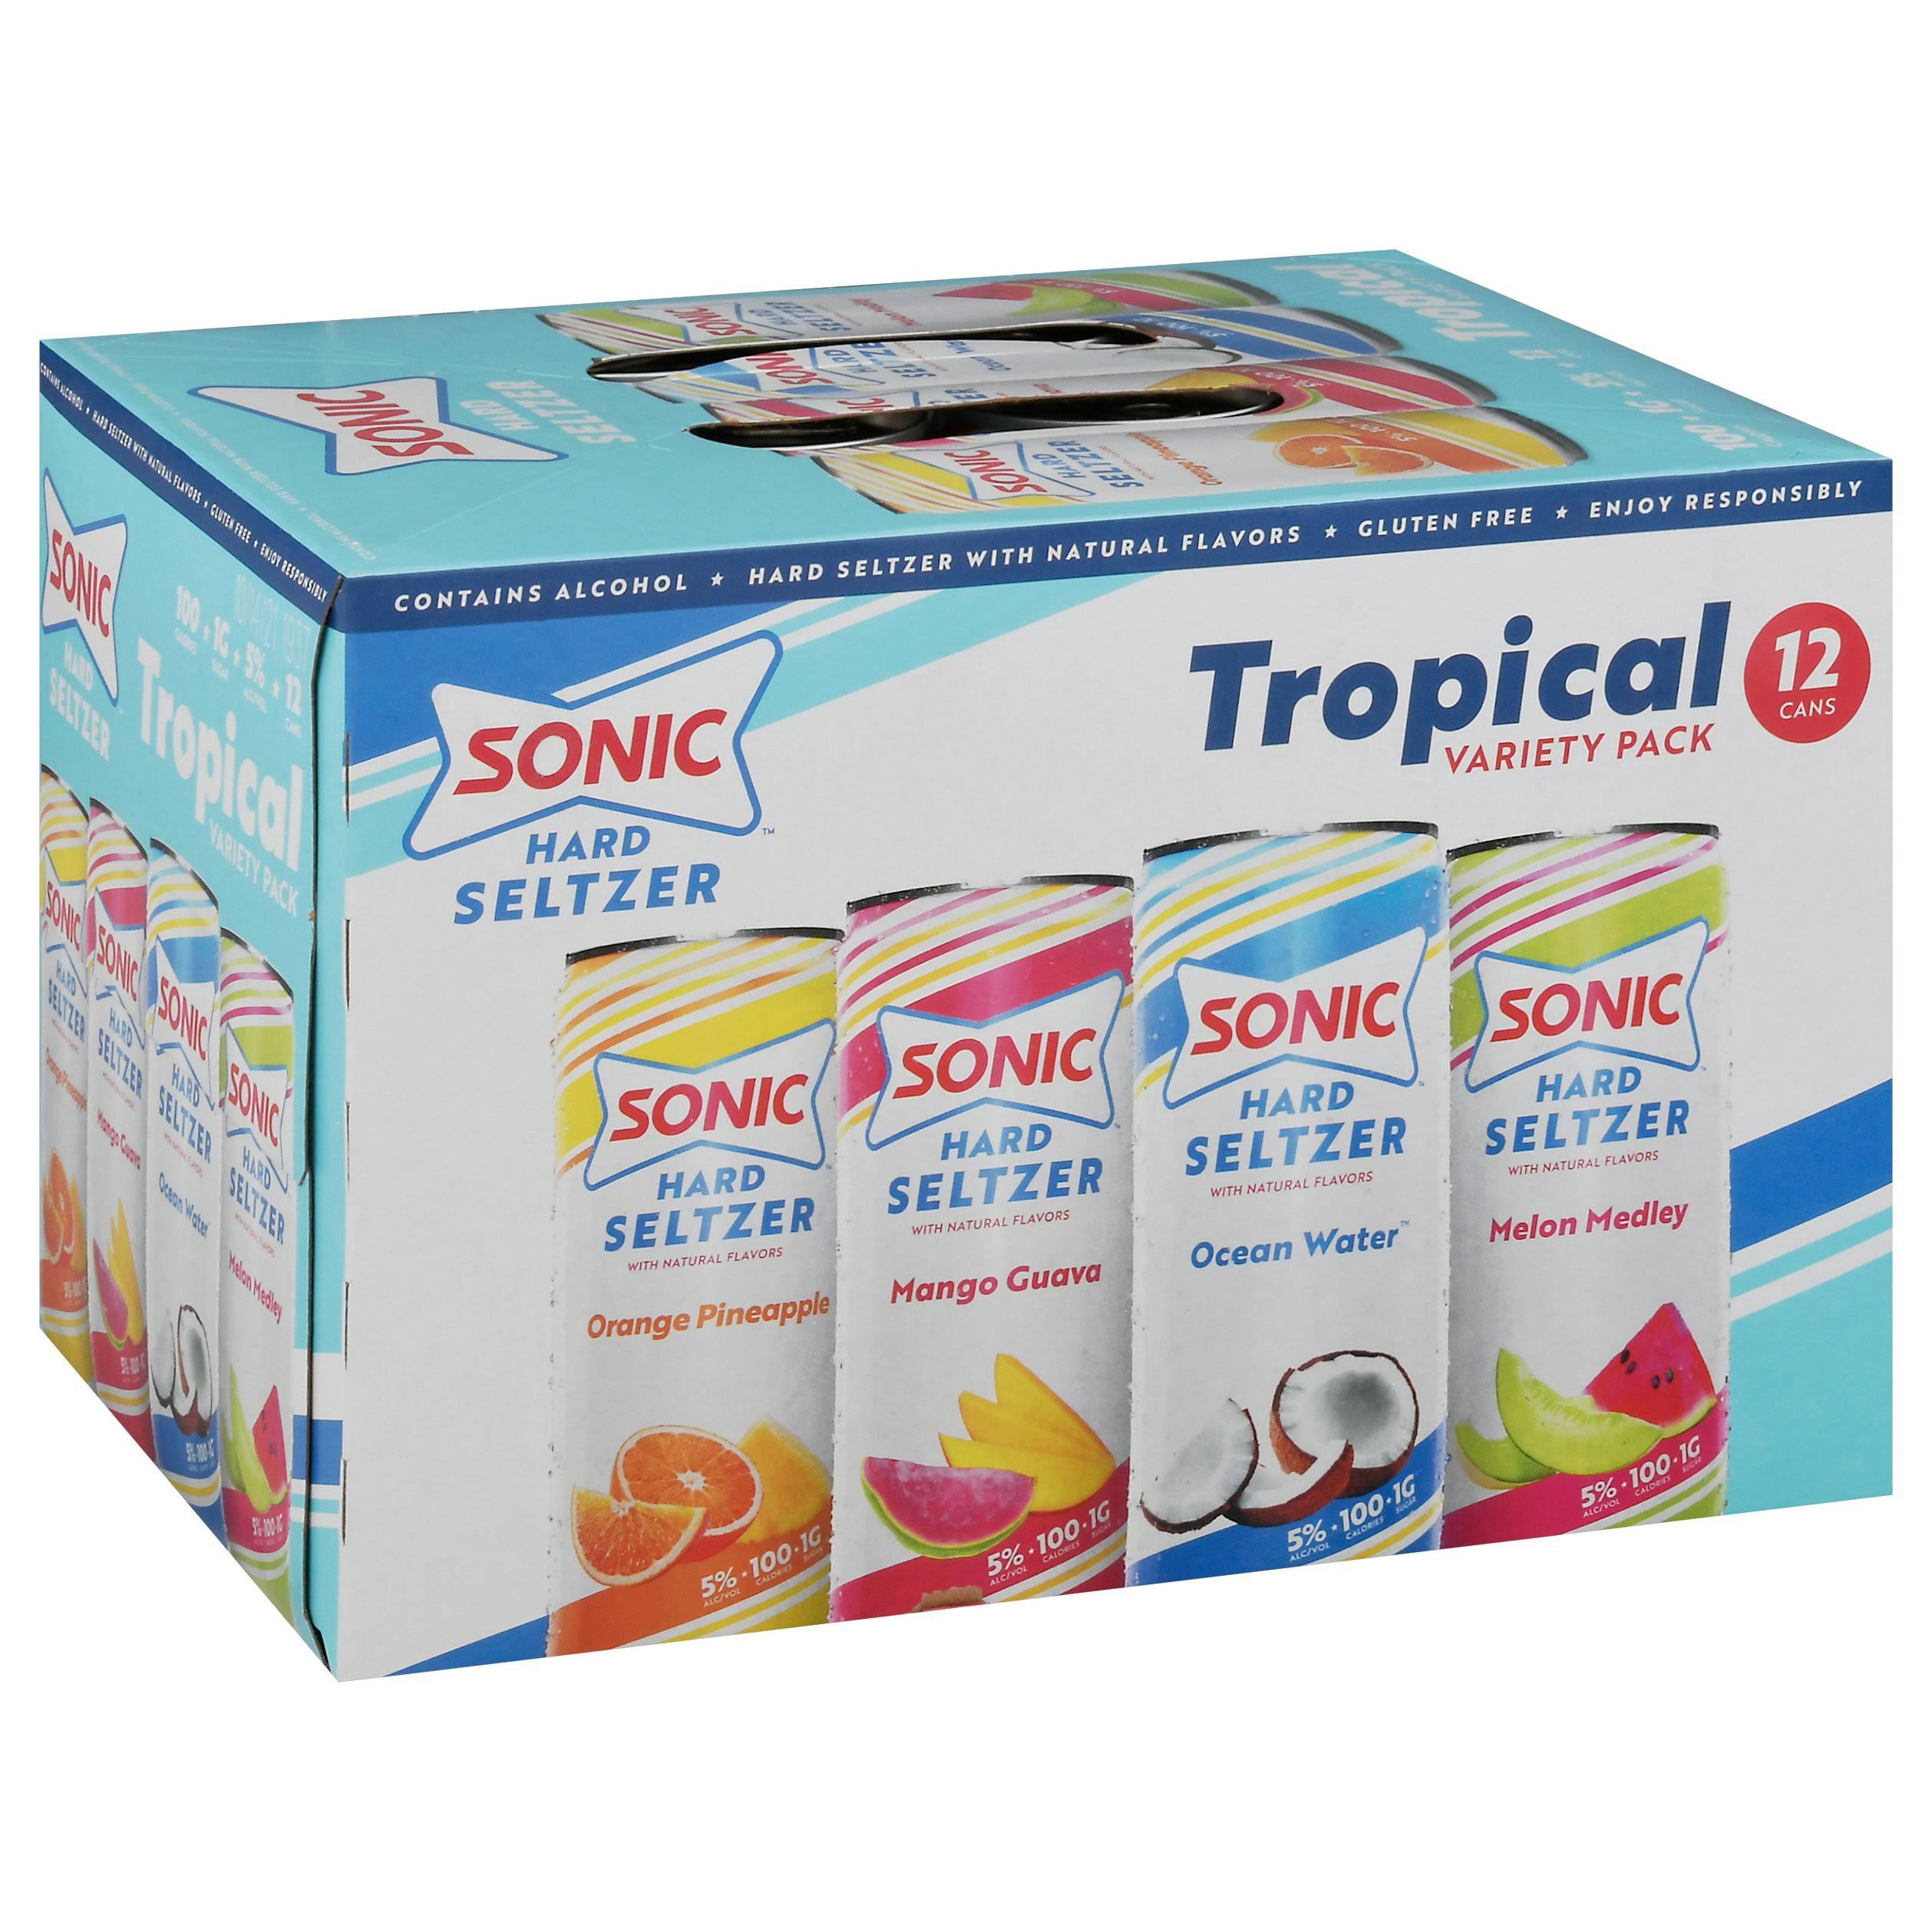 Sonic Hard Seltzer, Tropical Variety Pack - 12 pack, 12 fl oz cans